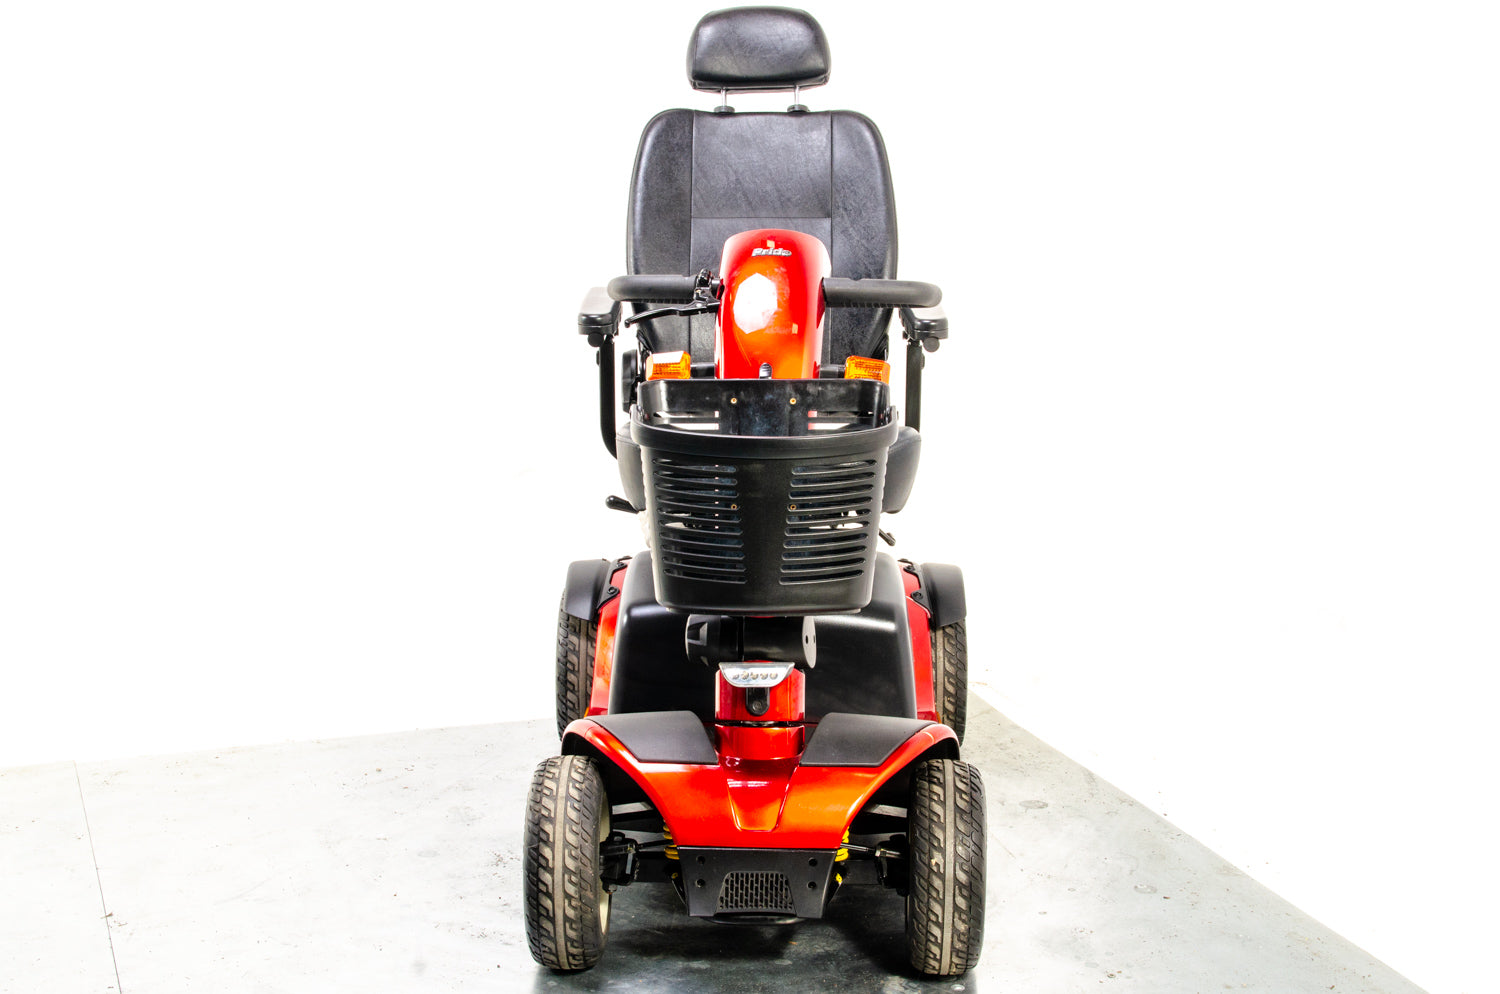 Pride Colt Sport Used Electric Mobility Scooter 8mph Transportable Suspension Pavement Road Legal Red 13503